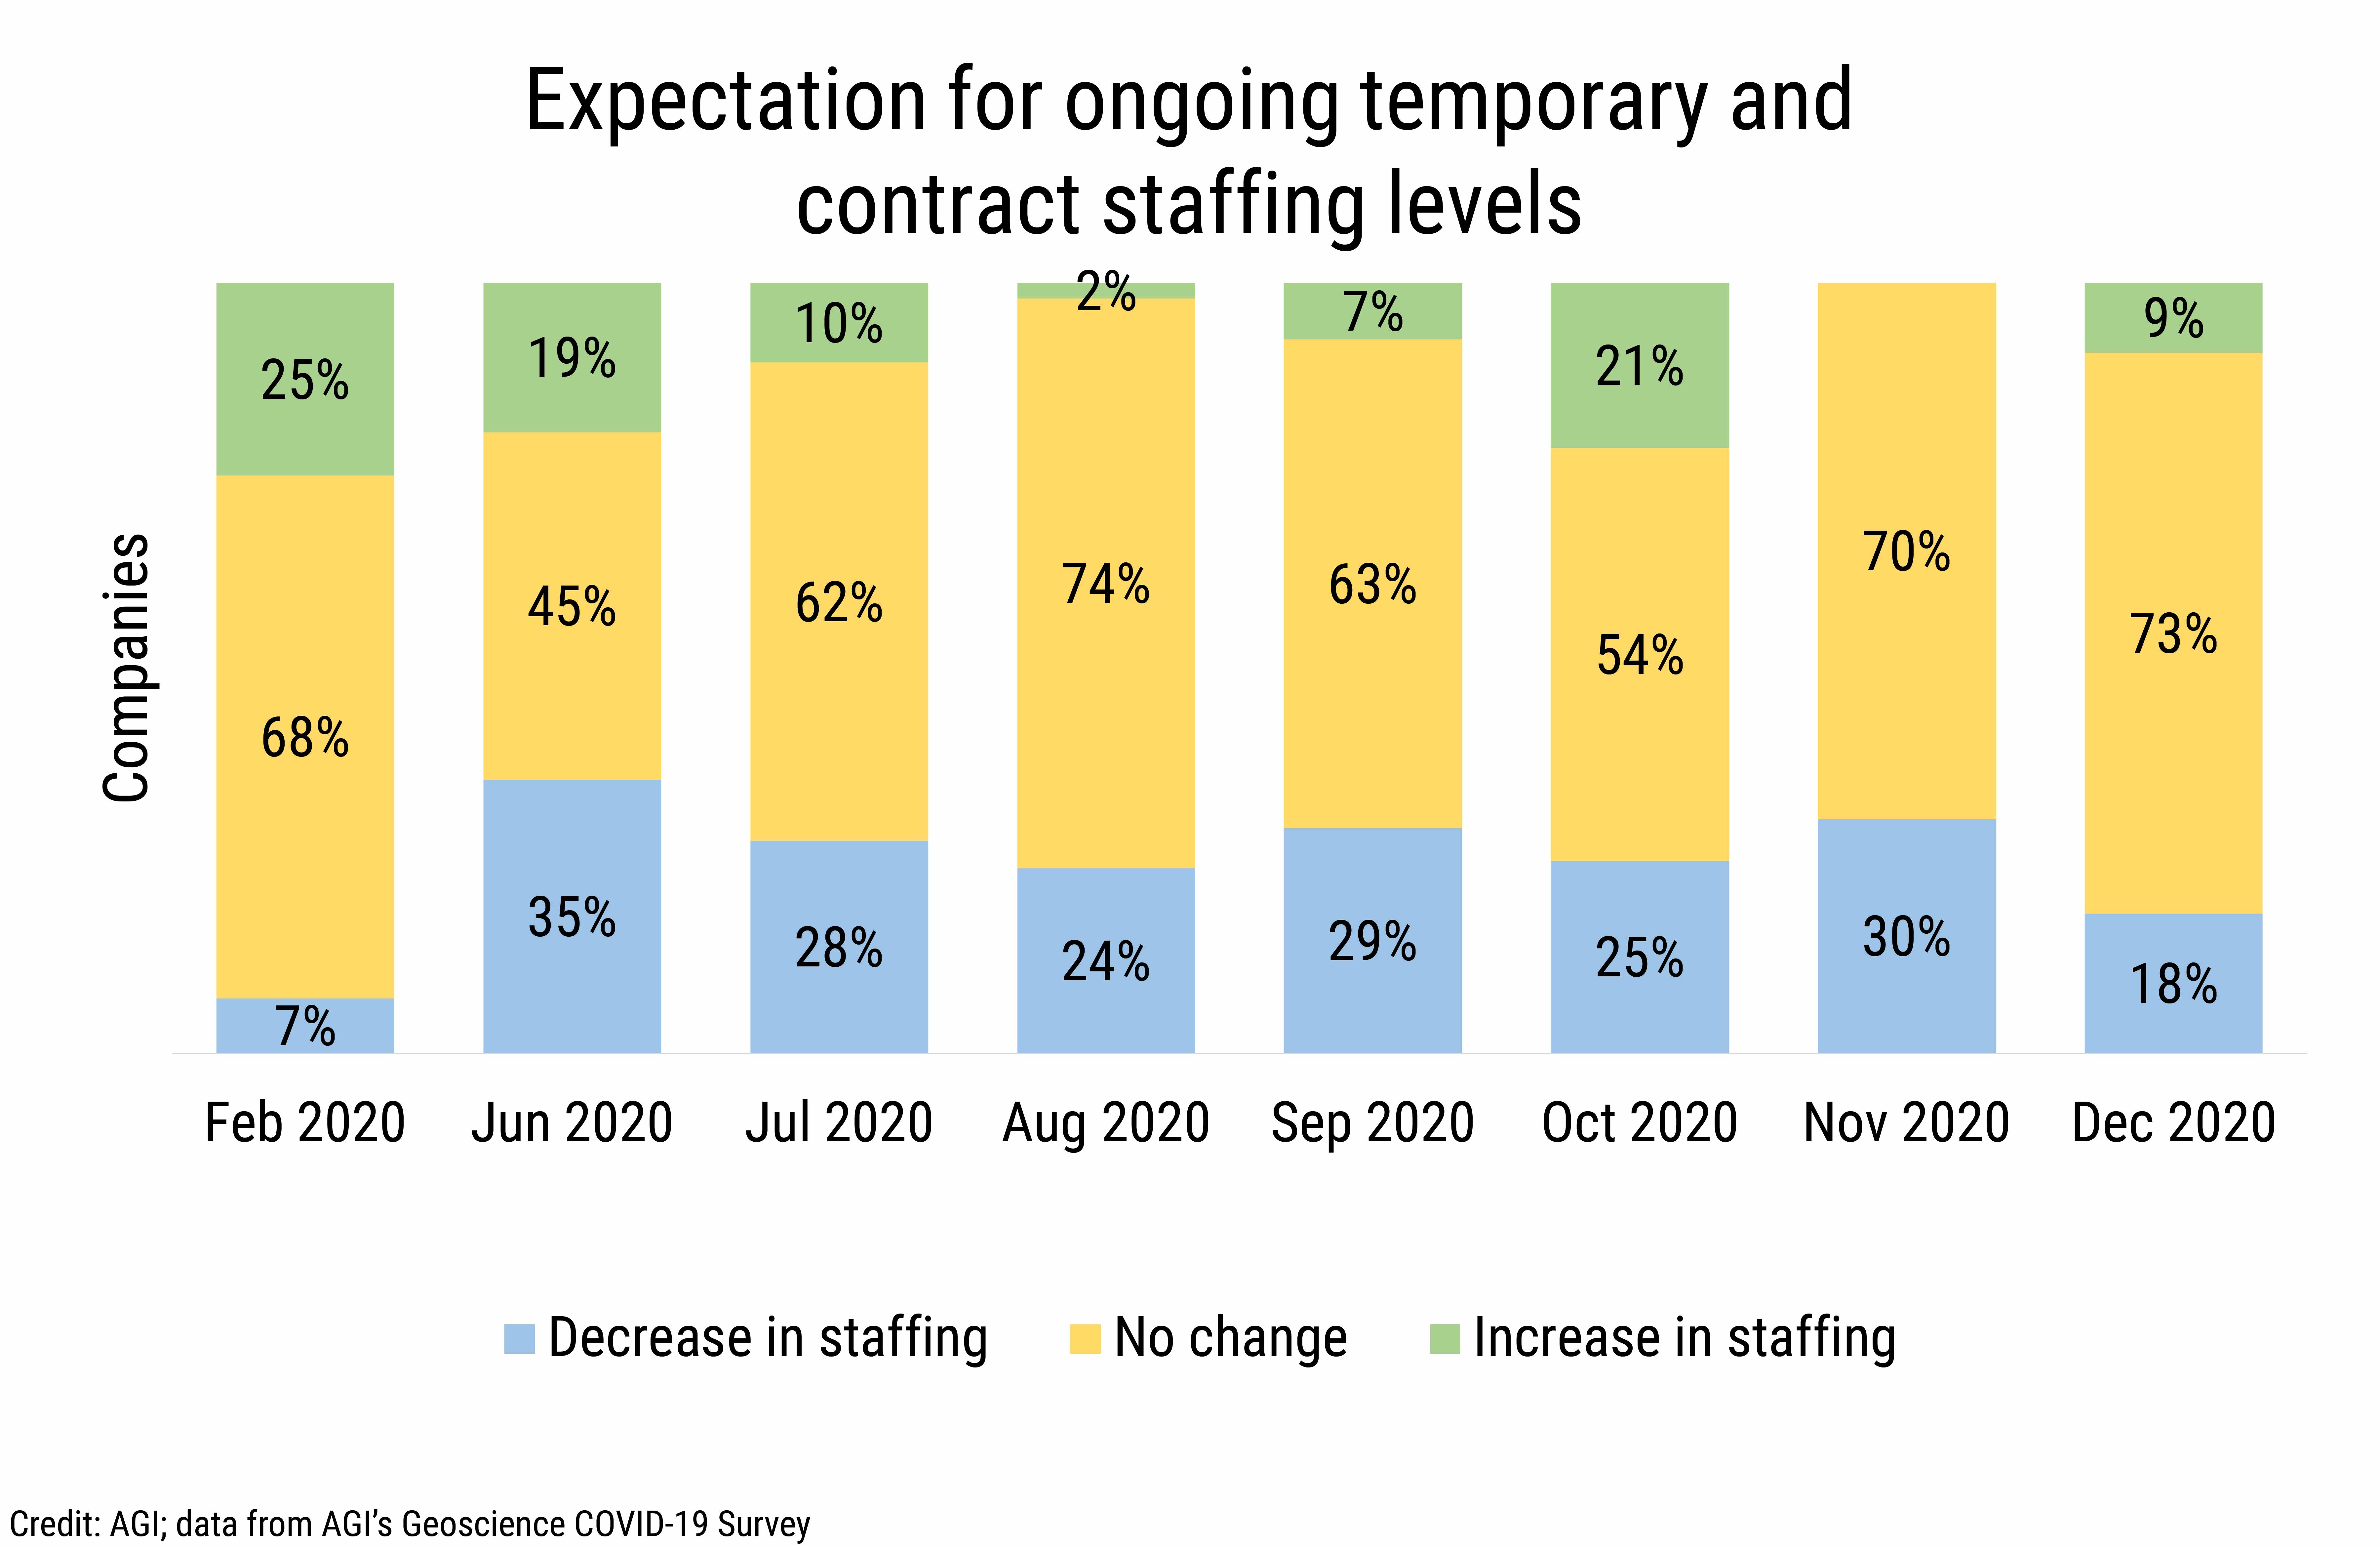 DB_2021-005_chart02: Expectation for ongoing temporary and contract staffing levels (Credit: AGI; data from AGI's Geoscience COVID-19 Survey)